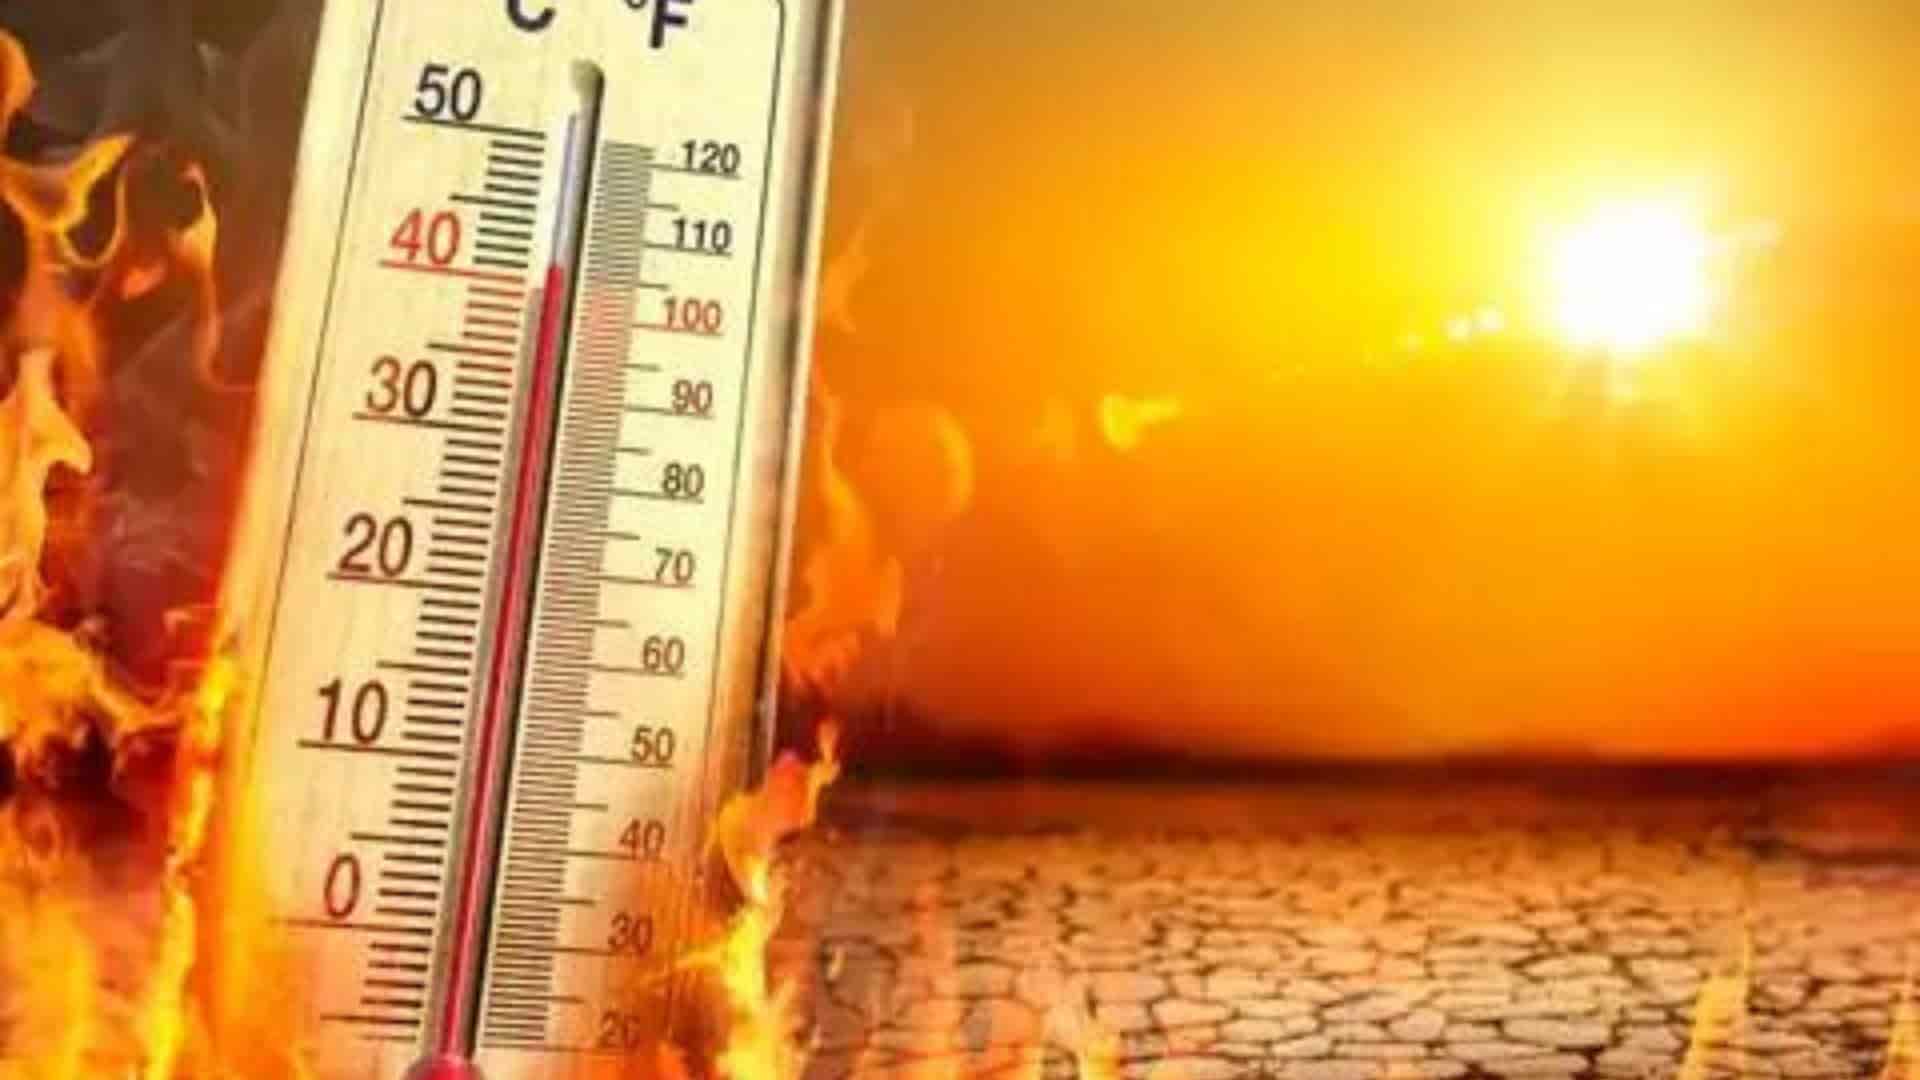 Rajasthan: Heatwave To Make A Comeback After Temporary Relief